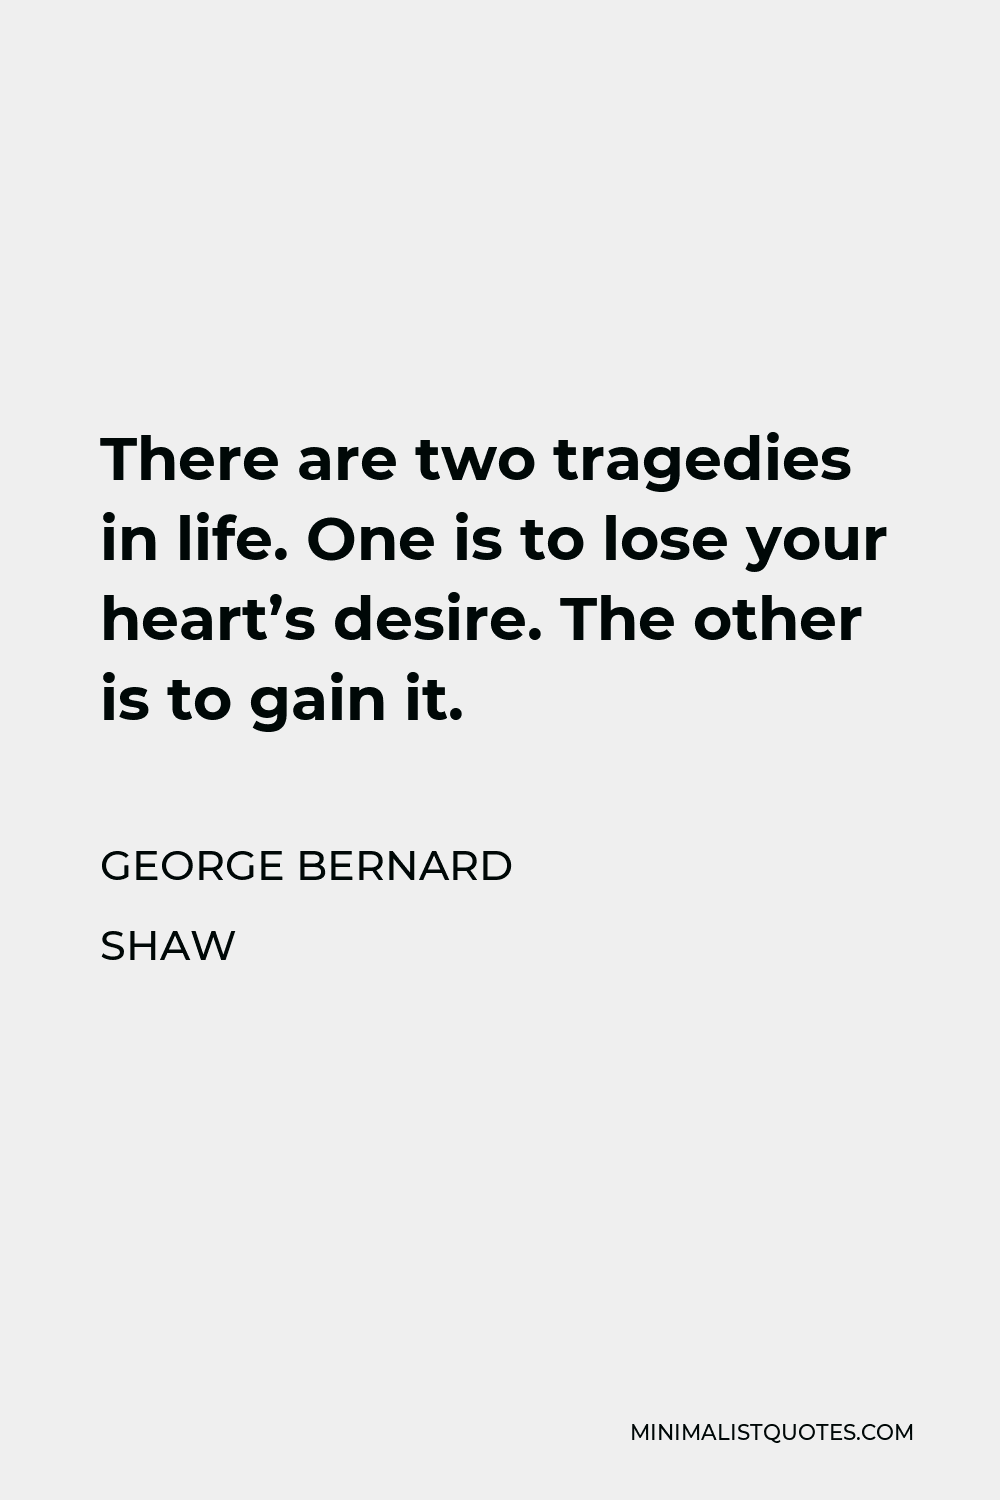 George Bernard Shaw Quote - There are two tragedies in life. One is to lose your heart’s desire. The other is to gain it.